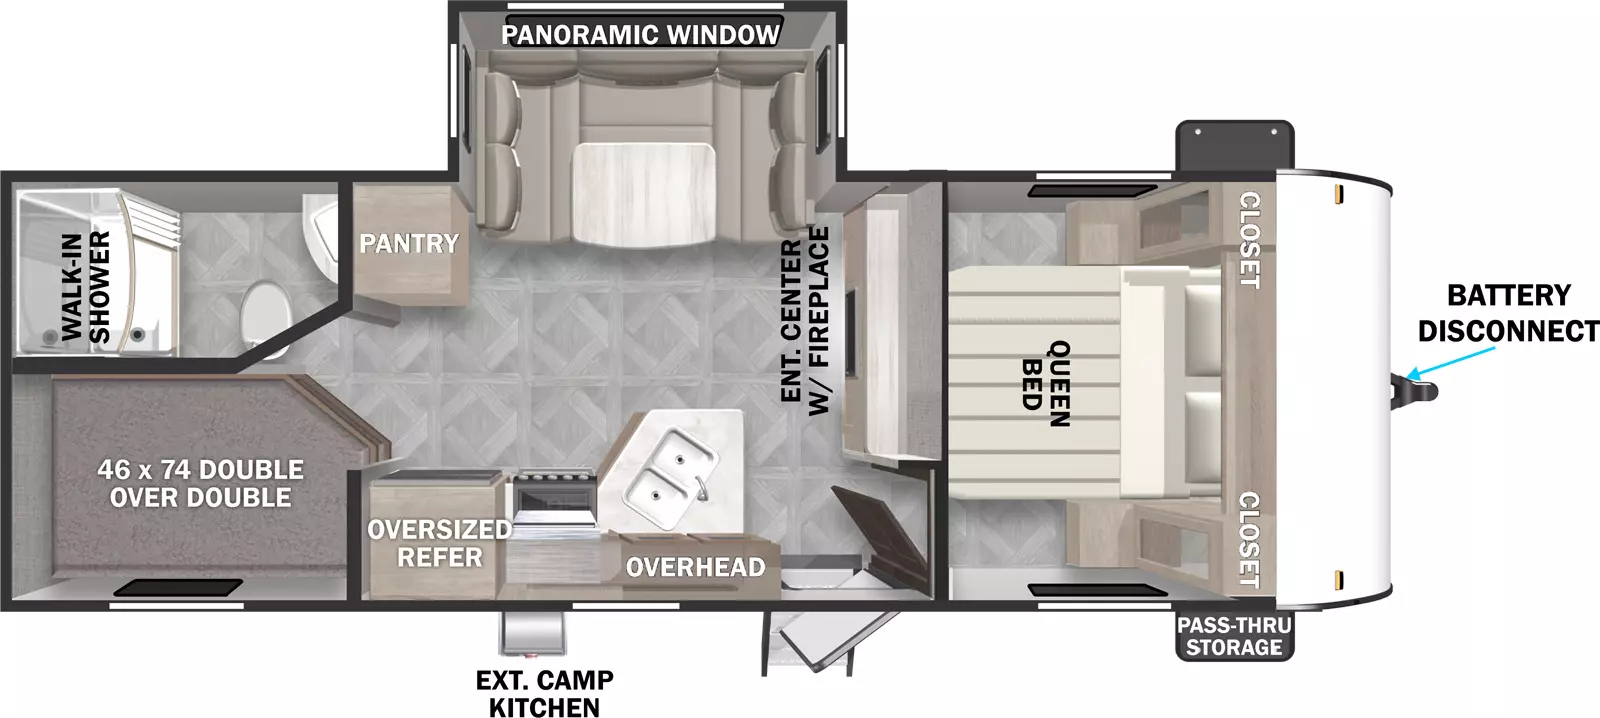 The 243BHXL has one entry and one slideout. Exterior features front pass-through storage, battery disconnect, and exterior camp kitchen. Interior layout front to back: Queen bed with closets on each side; entertainment center with fireplace along inner wall; off-door side slideout with u-dinette and panoramic window; door side entry, peninsula kitchen counter with sink wraps to door side with overhead cabinet, cooktop, and oversized refrigerator; off-door side pantry; rear off-door side full bathroom with walk-in shower; rear door side double over double bunks.